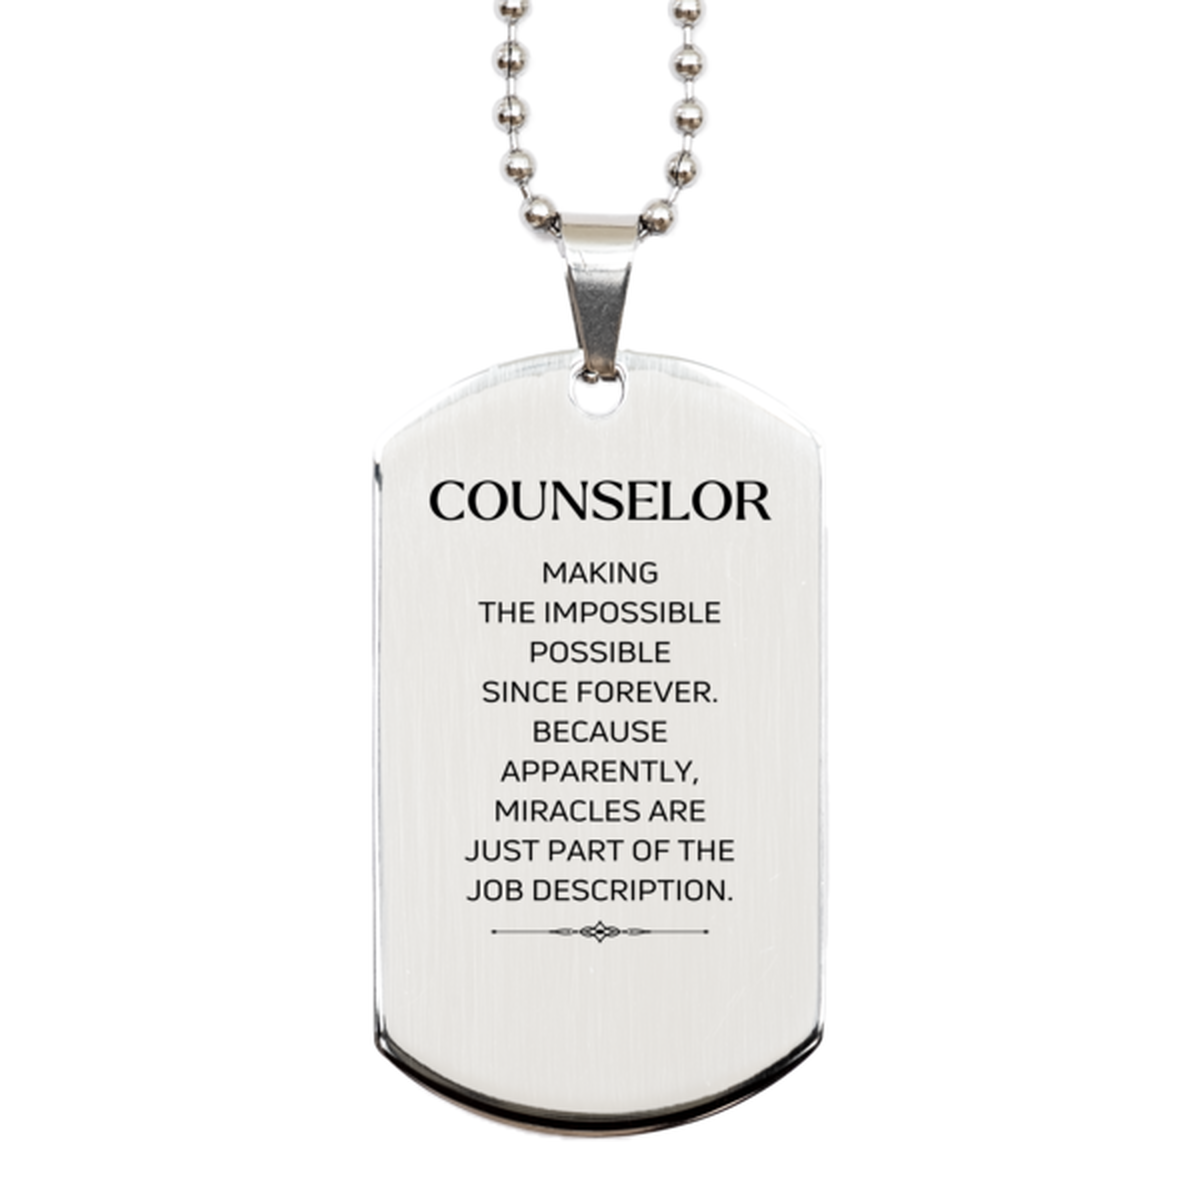 Funny Counselor Gifts, Miracles are just part of the job description, Inspirational Birthday Silver Dog Tag For Counselor, Men, Women, Coworkers, Friends, Boss